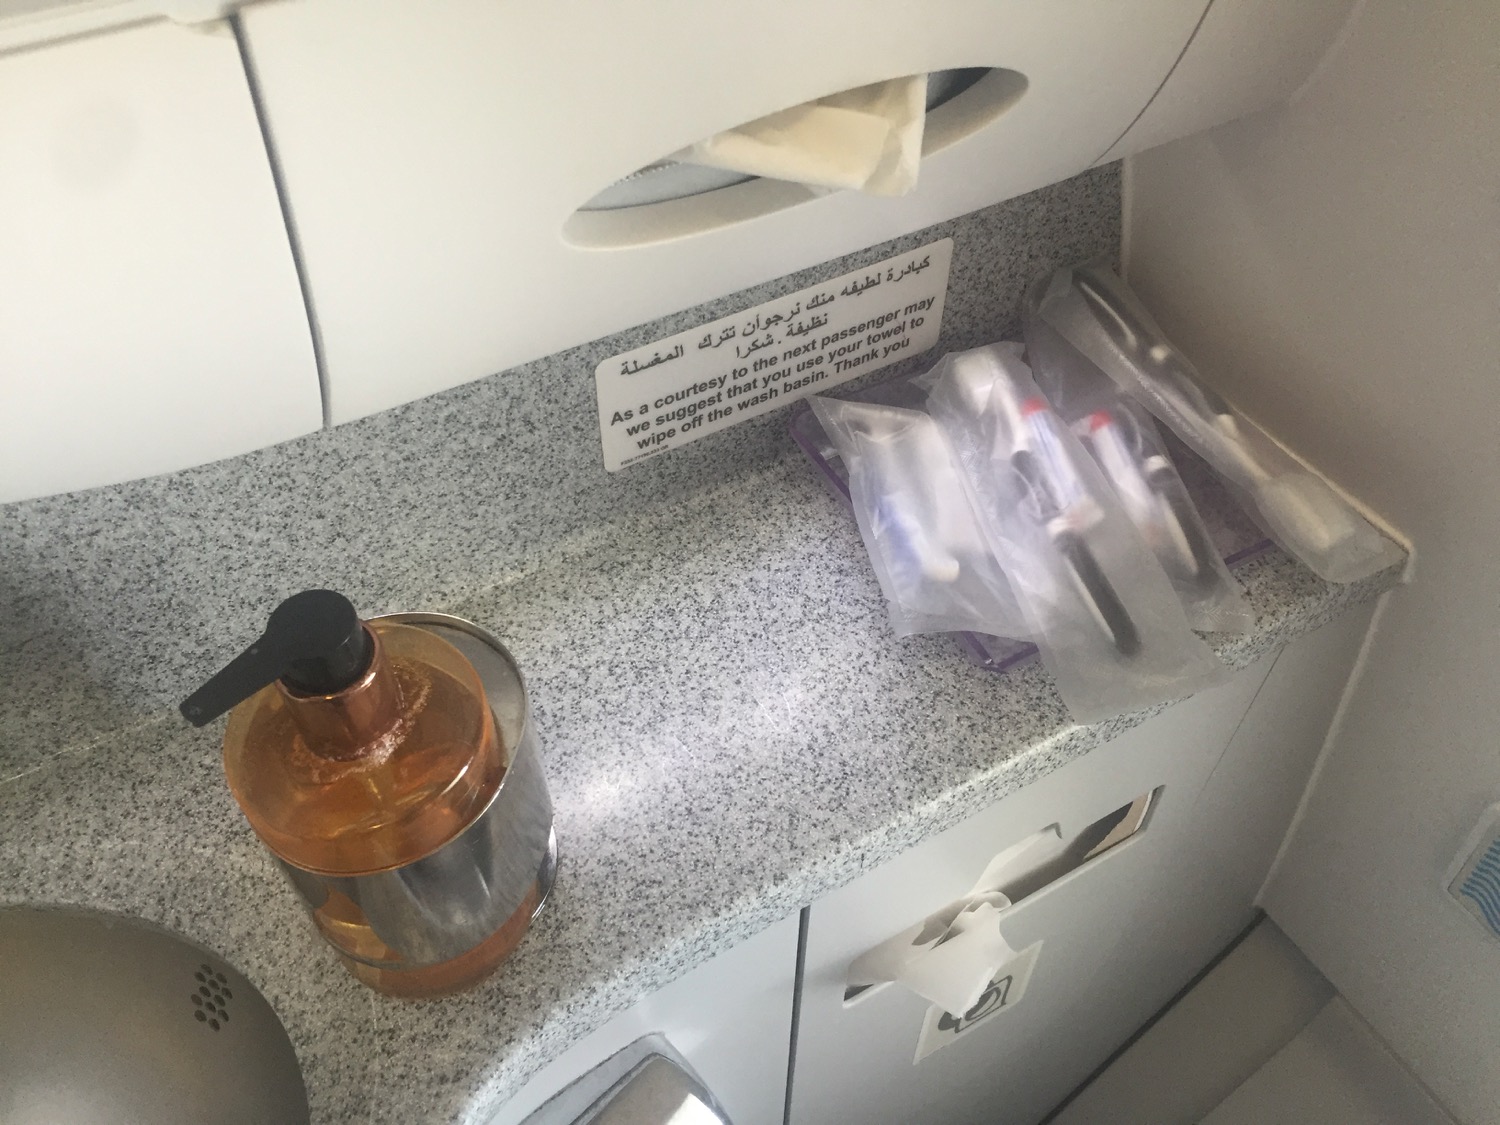 a soap dispenser and other items on a counter